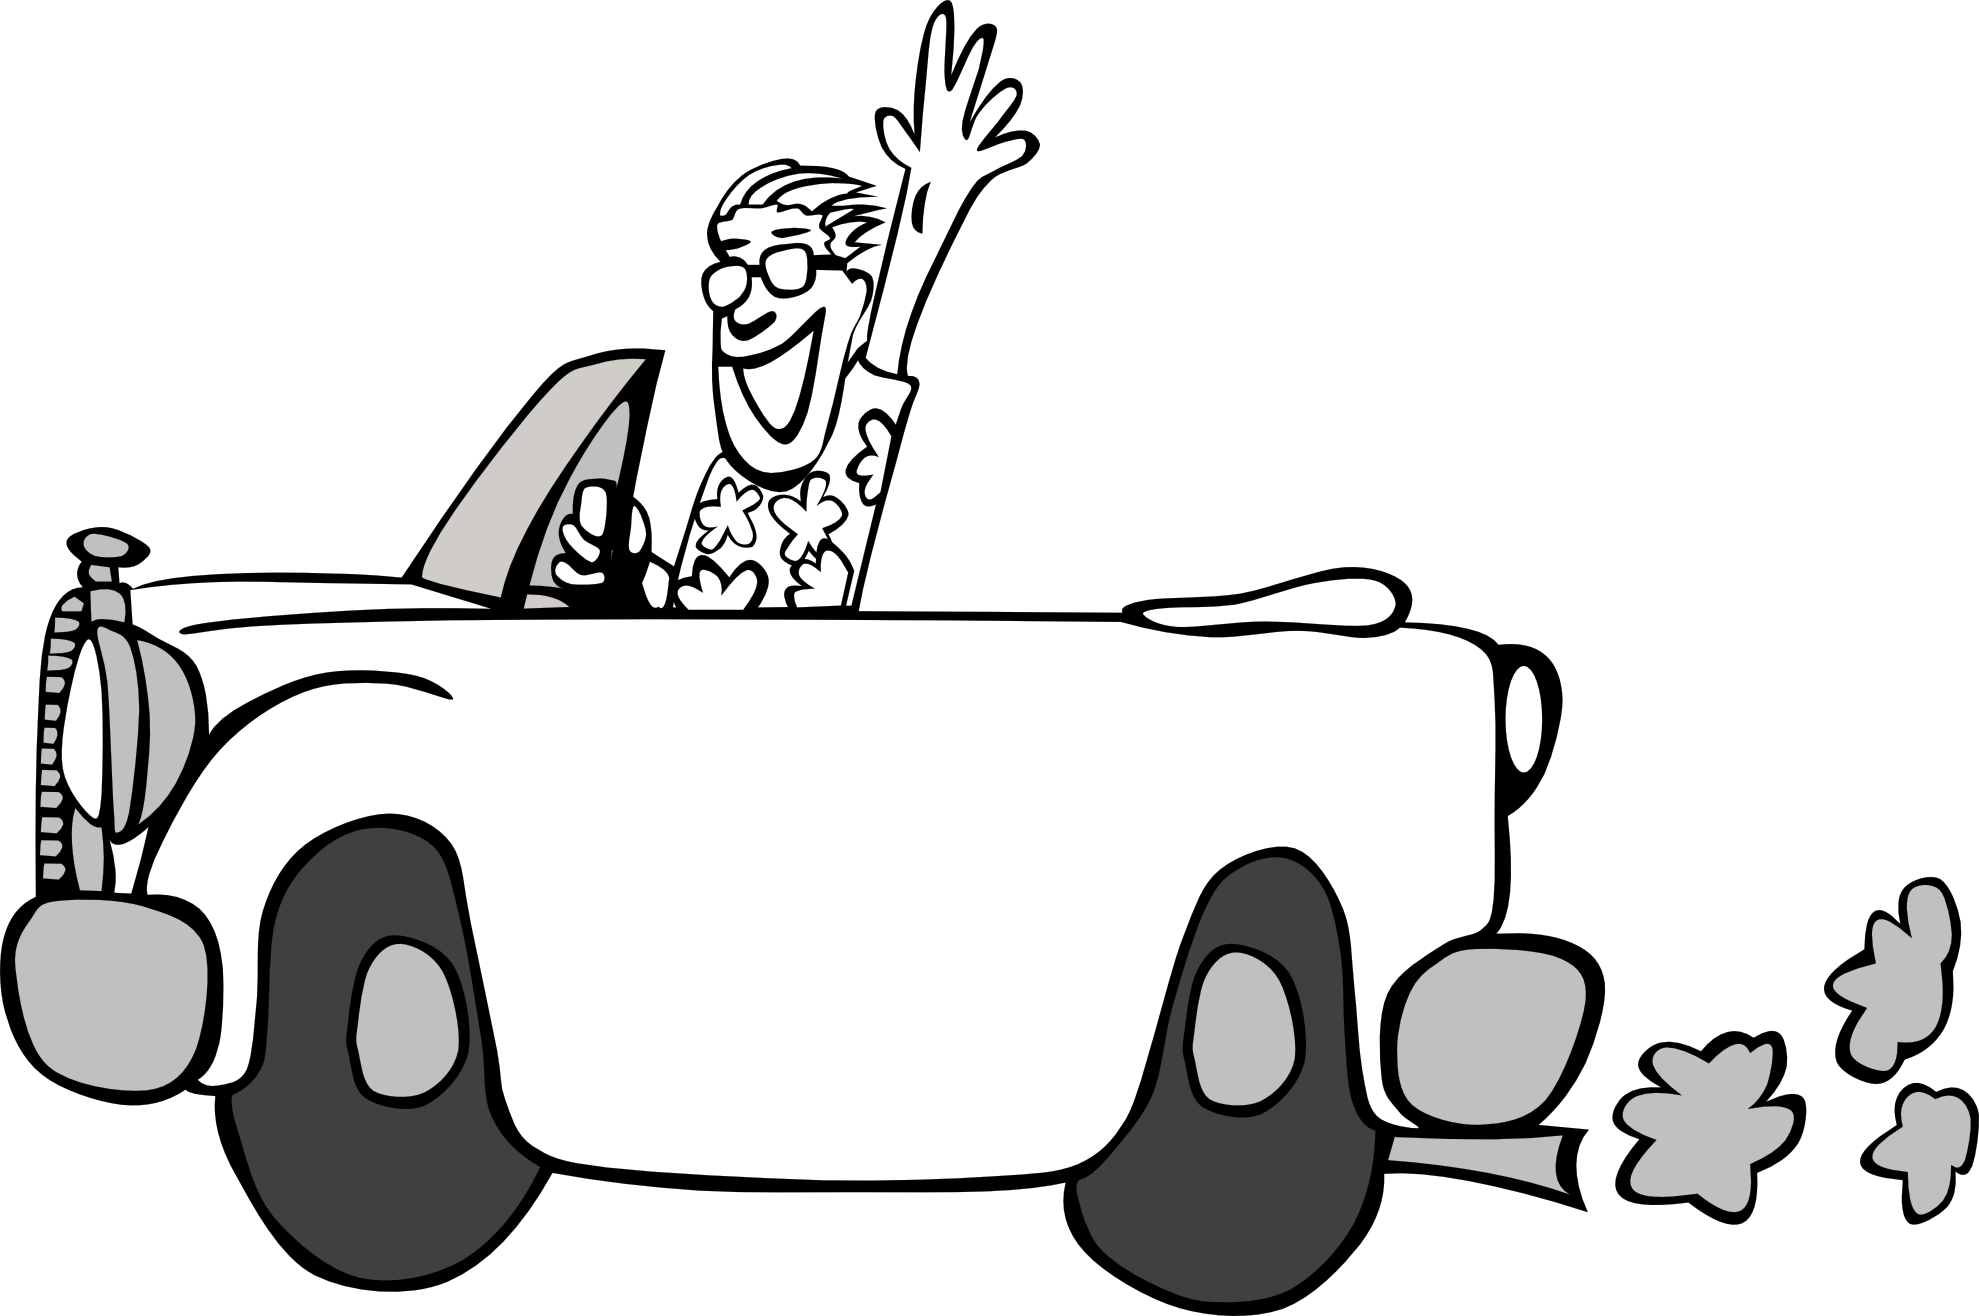 Car Line Drawings - ClipArt Best